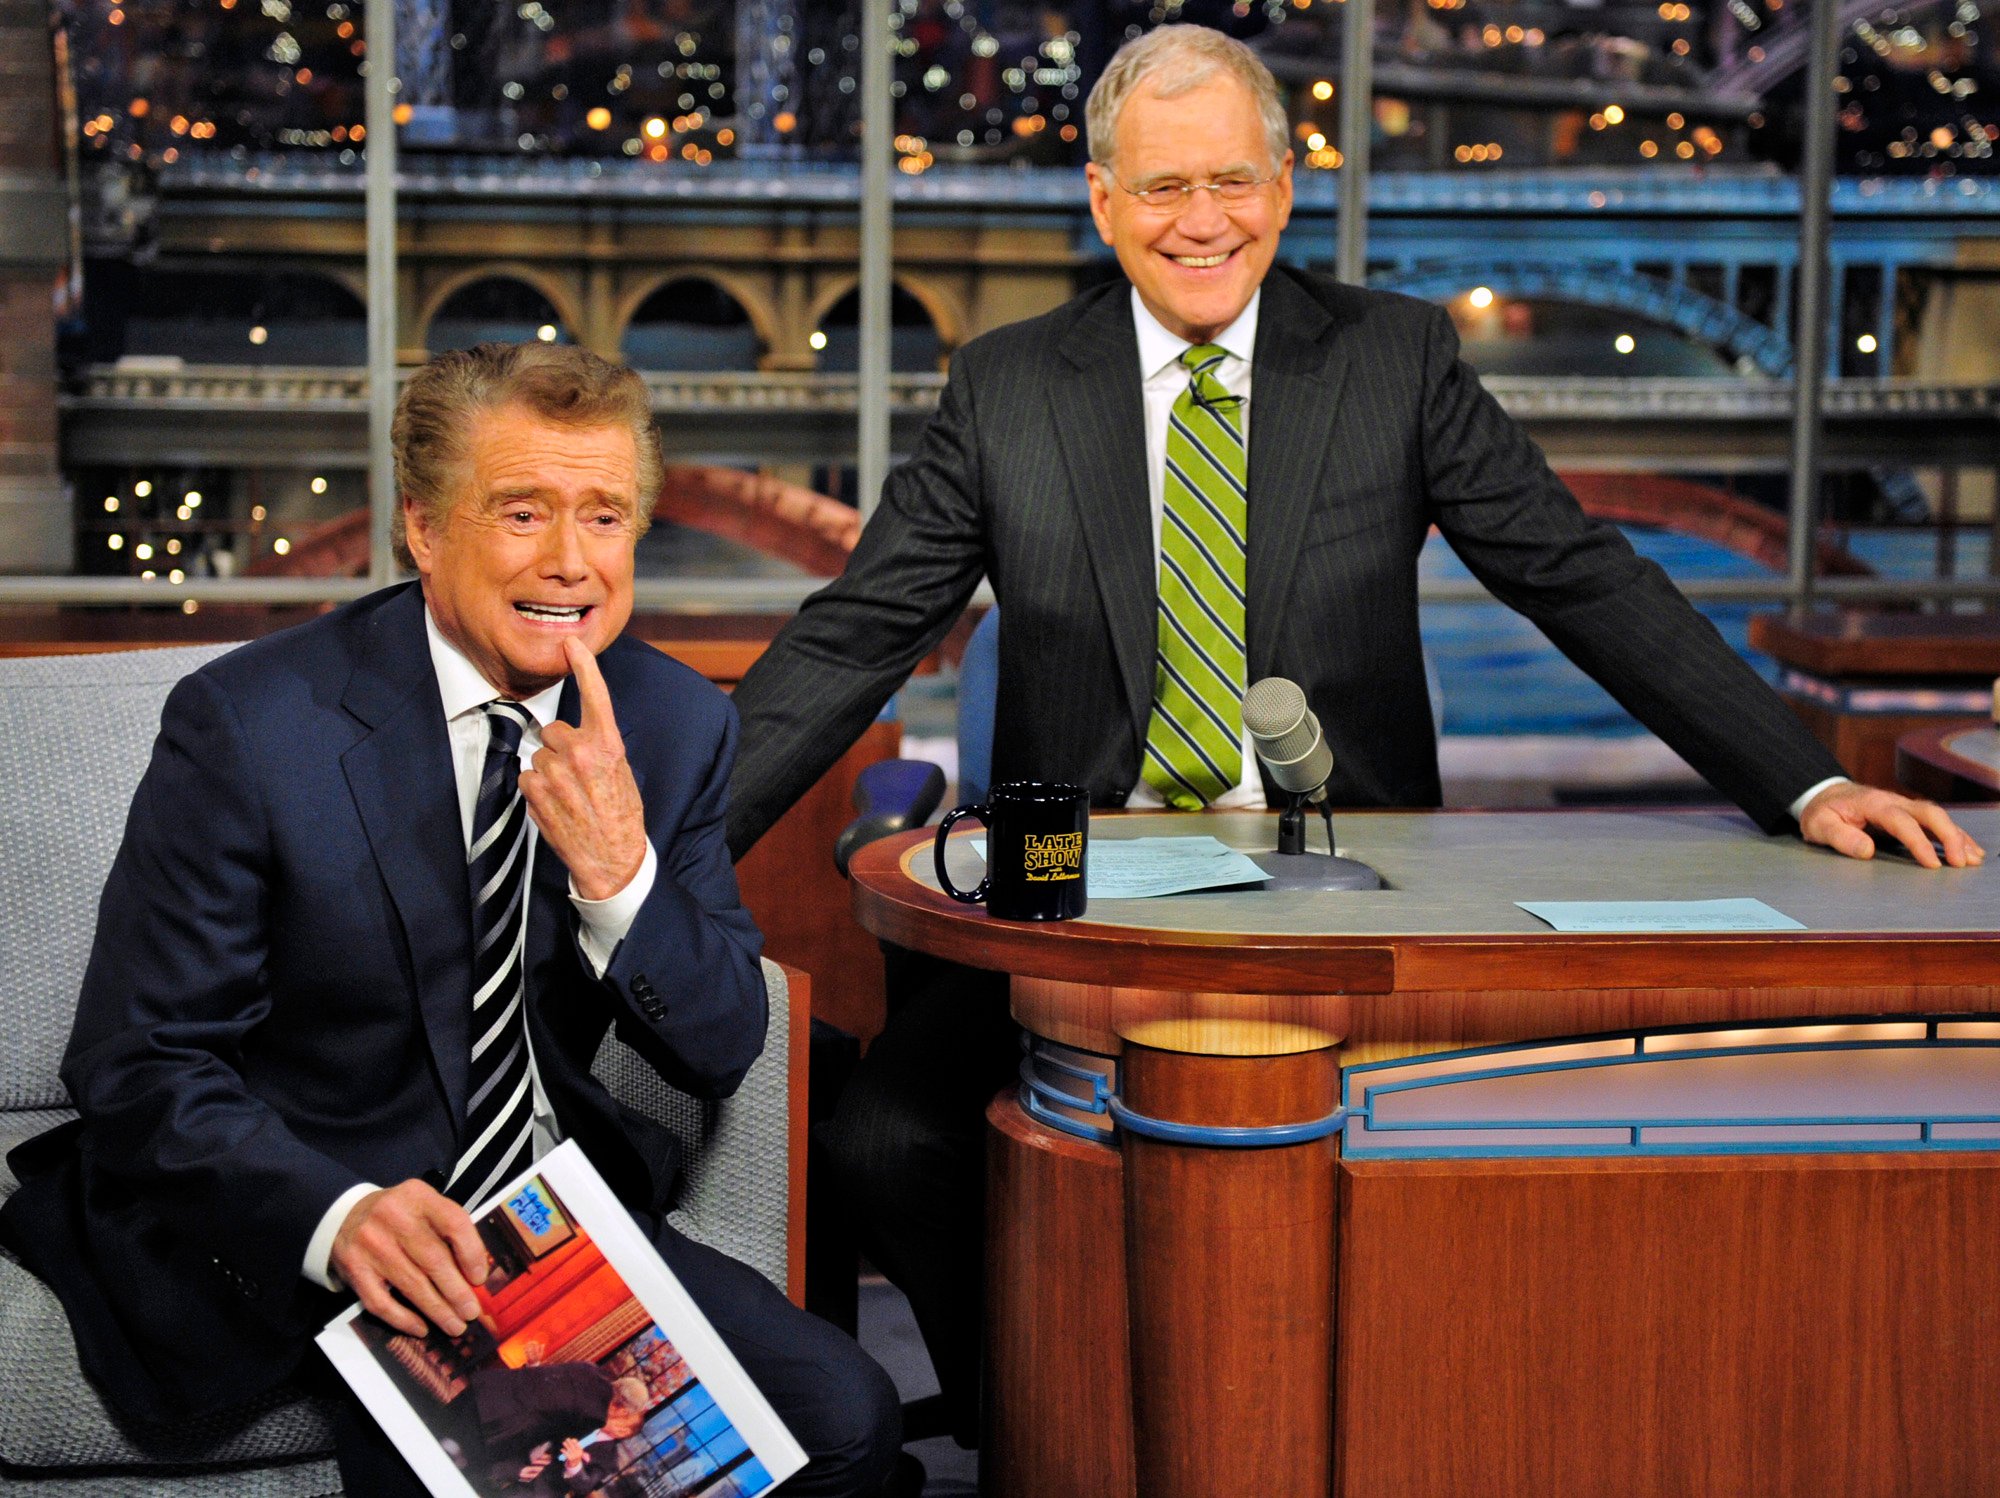 Regis Philbin makes an appearance on 'The Late Show With David Letterman' in 